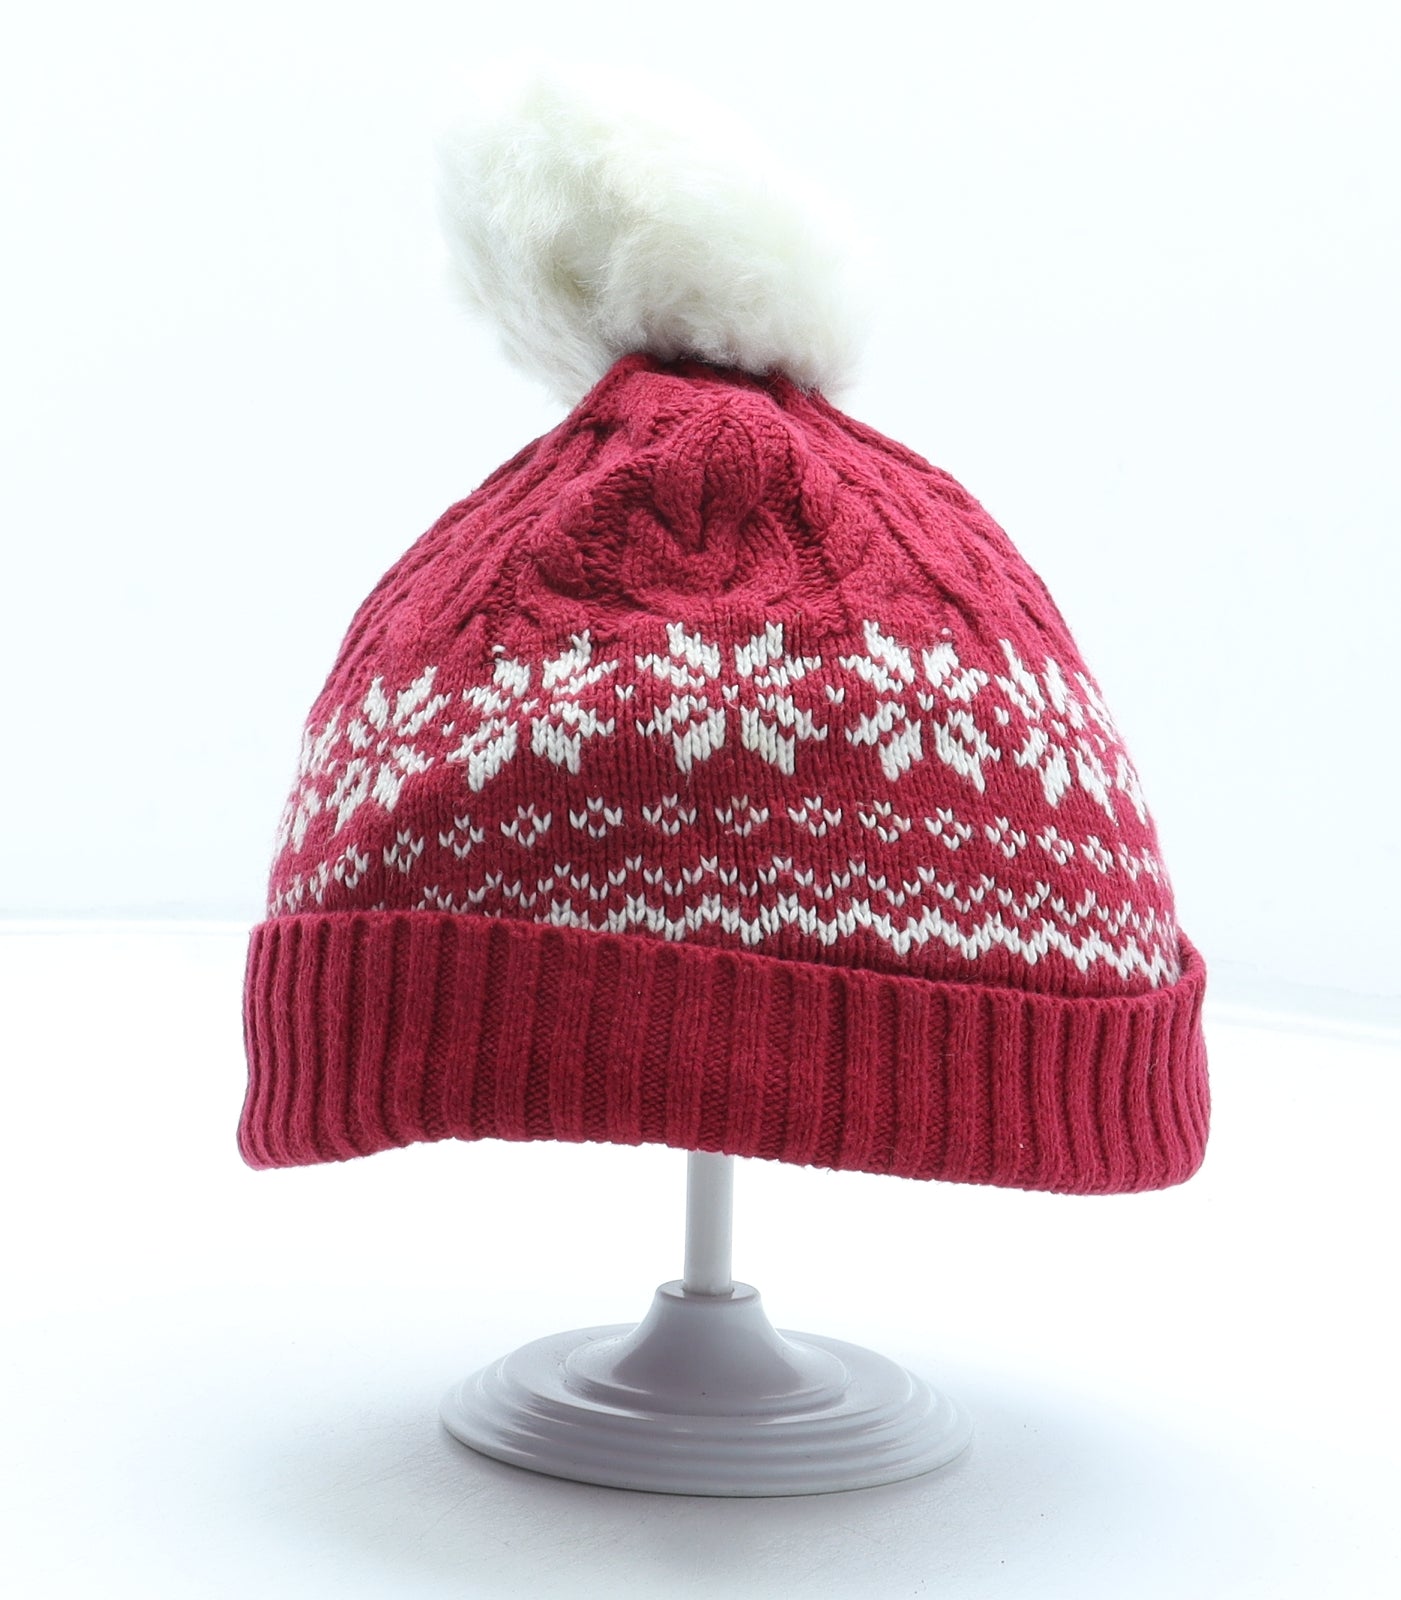 Preworn Girls Red Fair Isle Acrylic Bobble Hat One Size - Size 4-5 Years